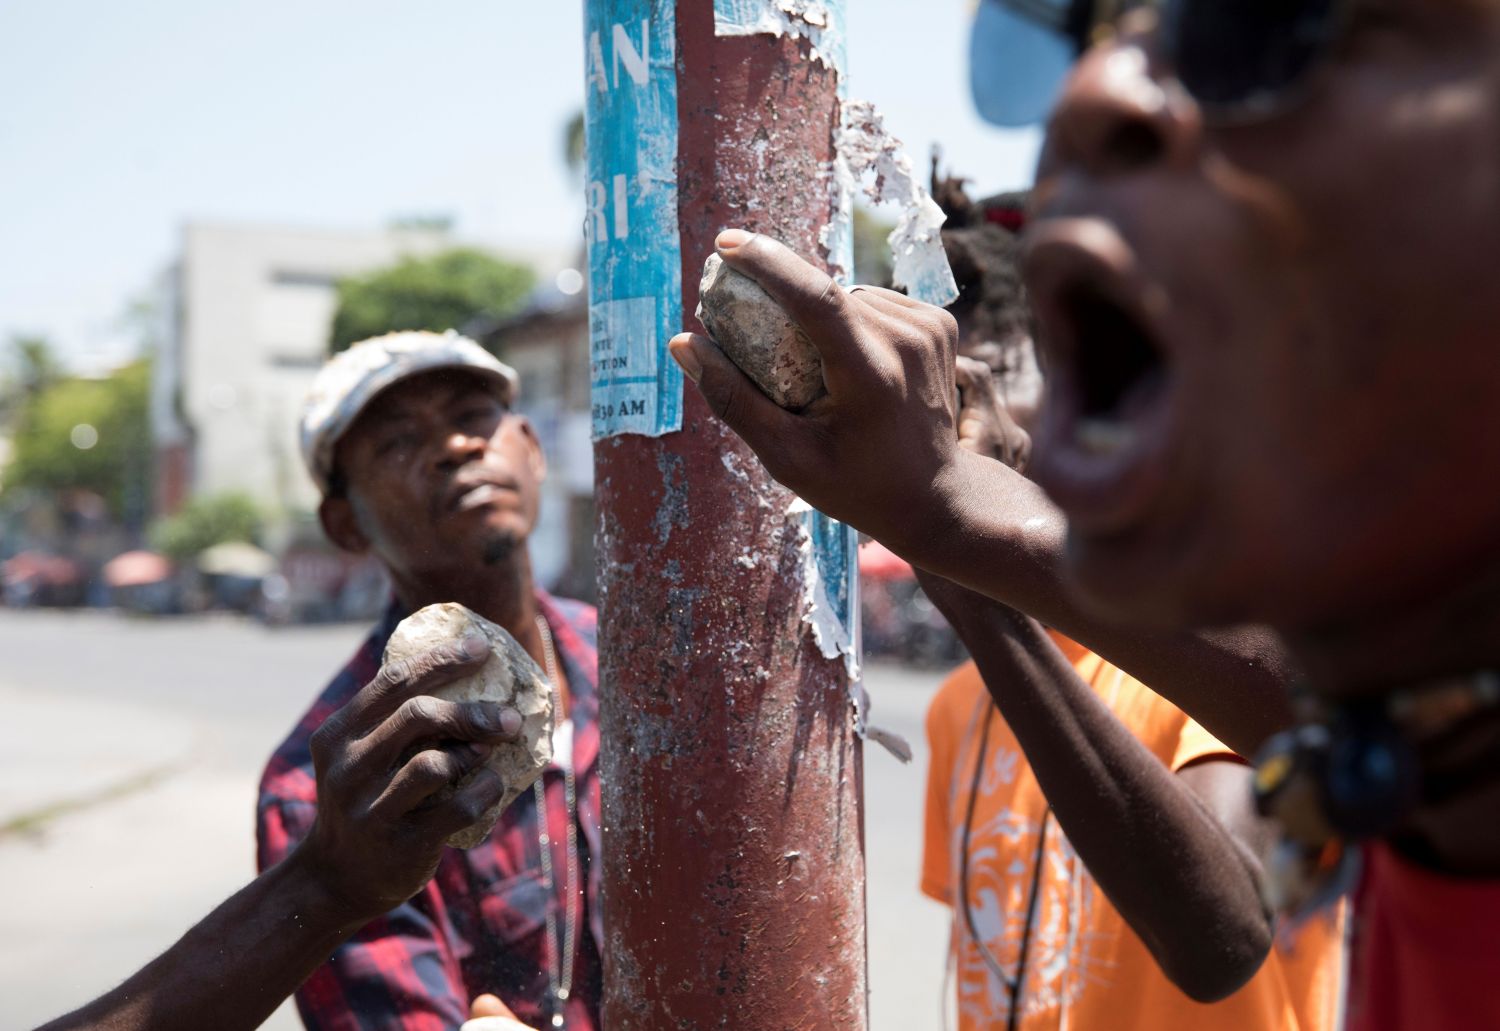 People make noise during a protest against an epidemic of kidnappings sweeping Haiti, amid deepening political unrest and economic misery, in Port-au-Prince, Haiti April 15, 2021. Picture taken April 15, 2021. REUTERS/Valerie Baeriswyl